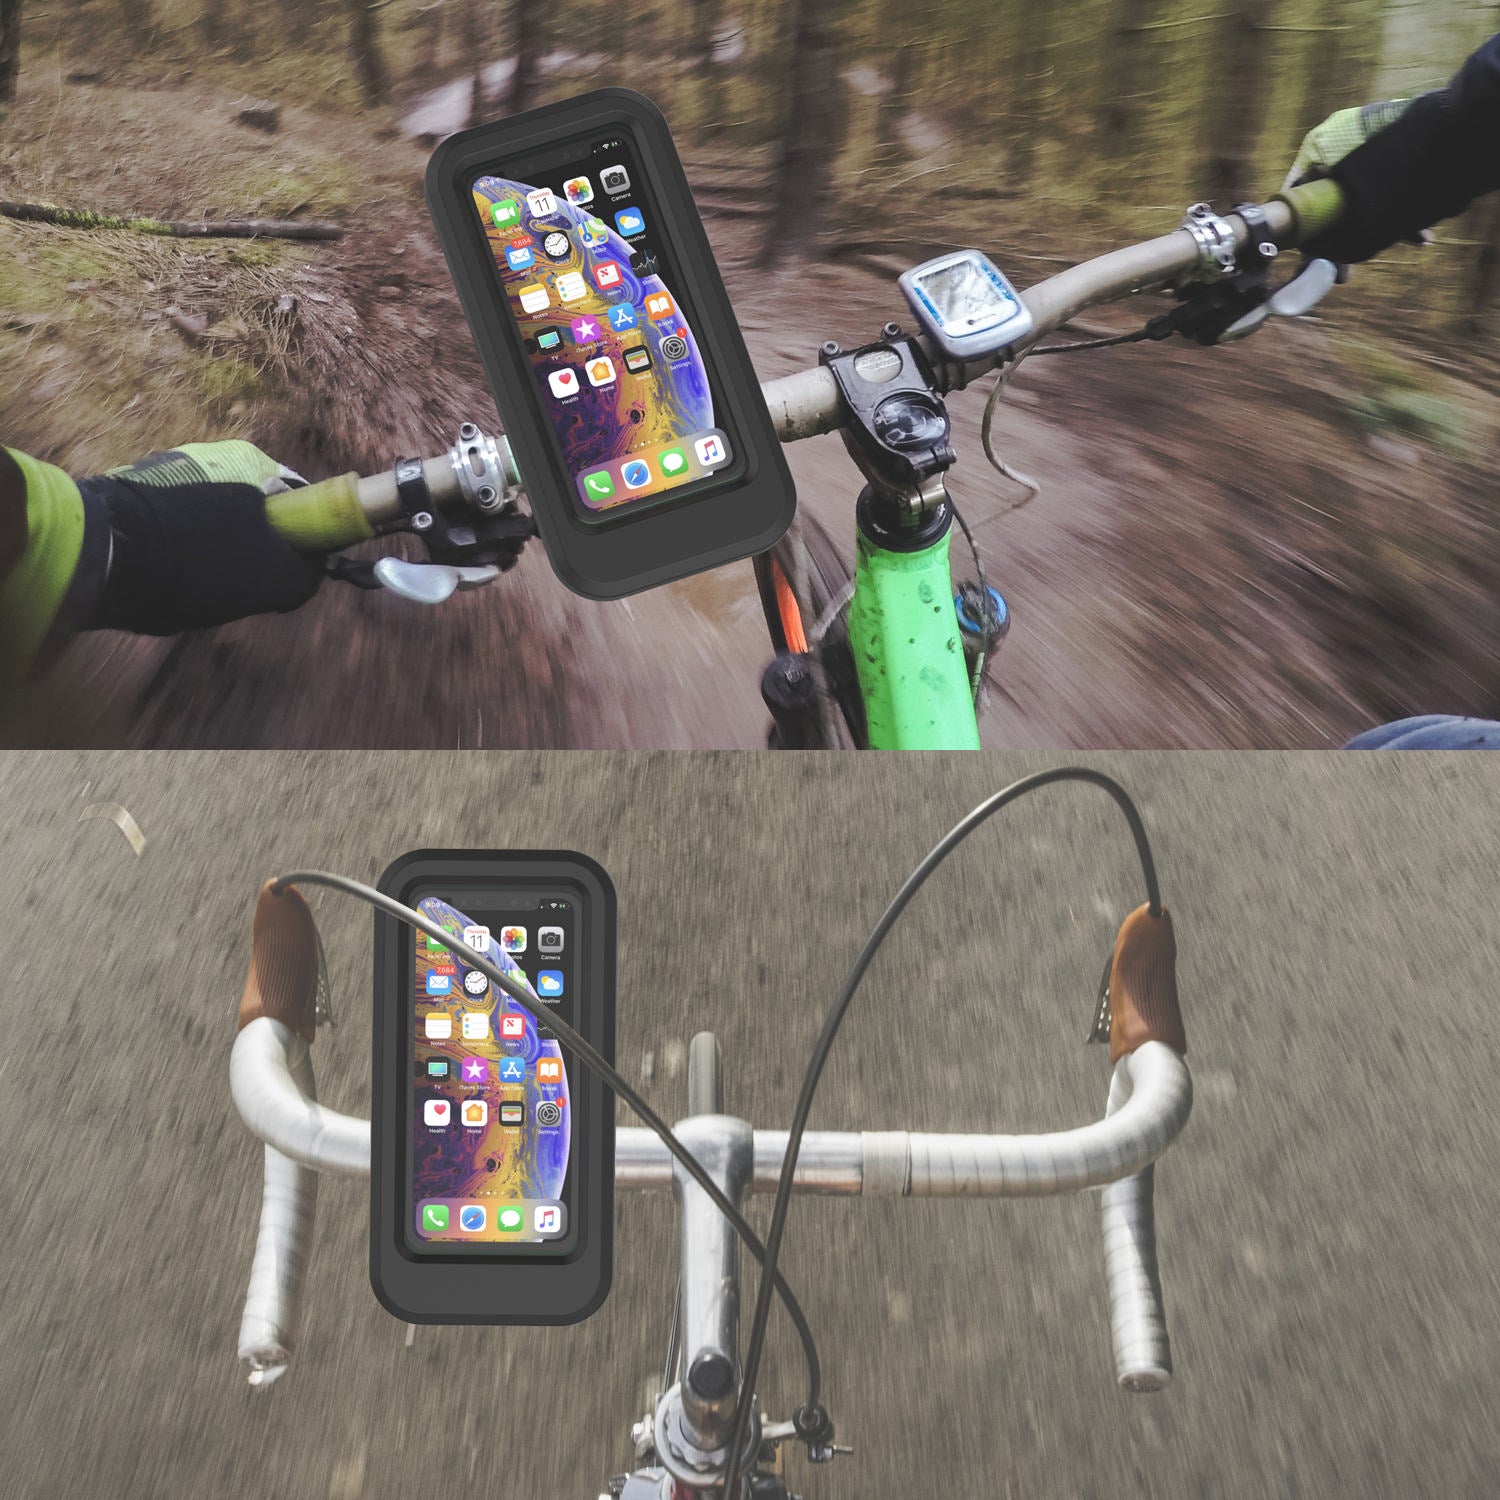 Punkcase Waterproof Bike Phone Case | Universal Handlebar Stand for Cellphones Up to 6.7